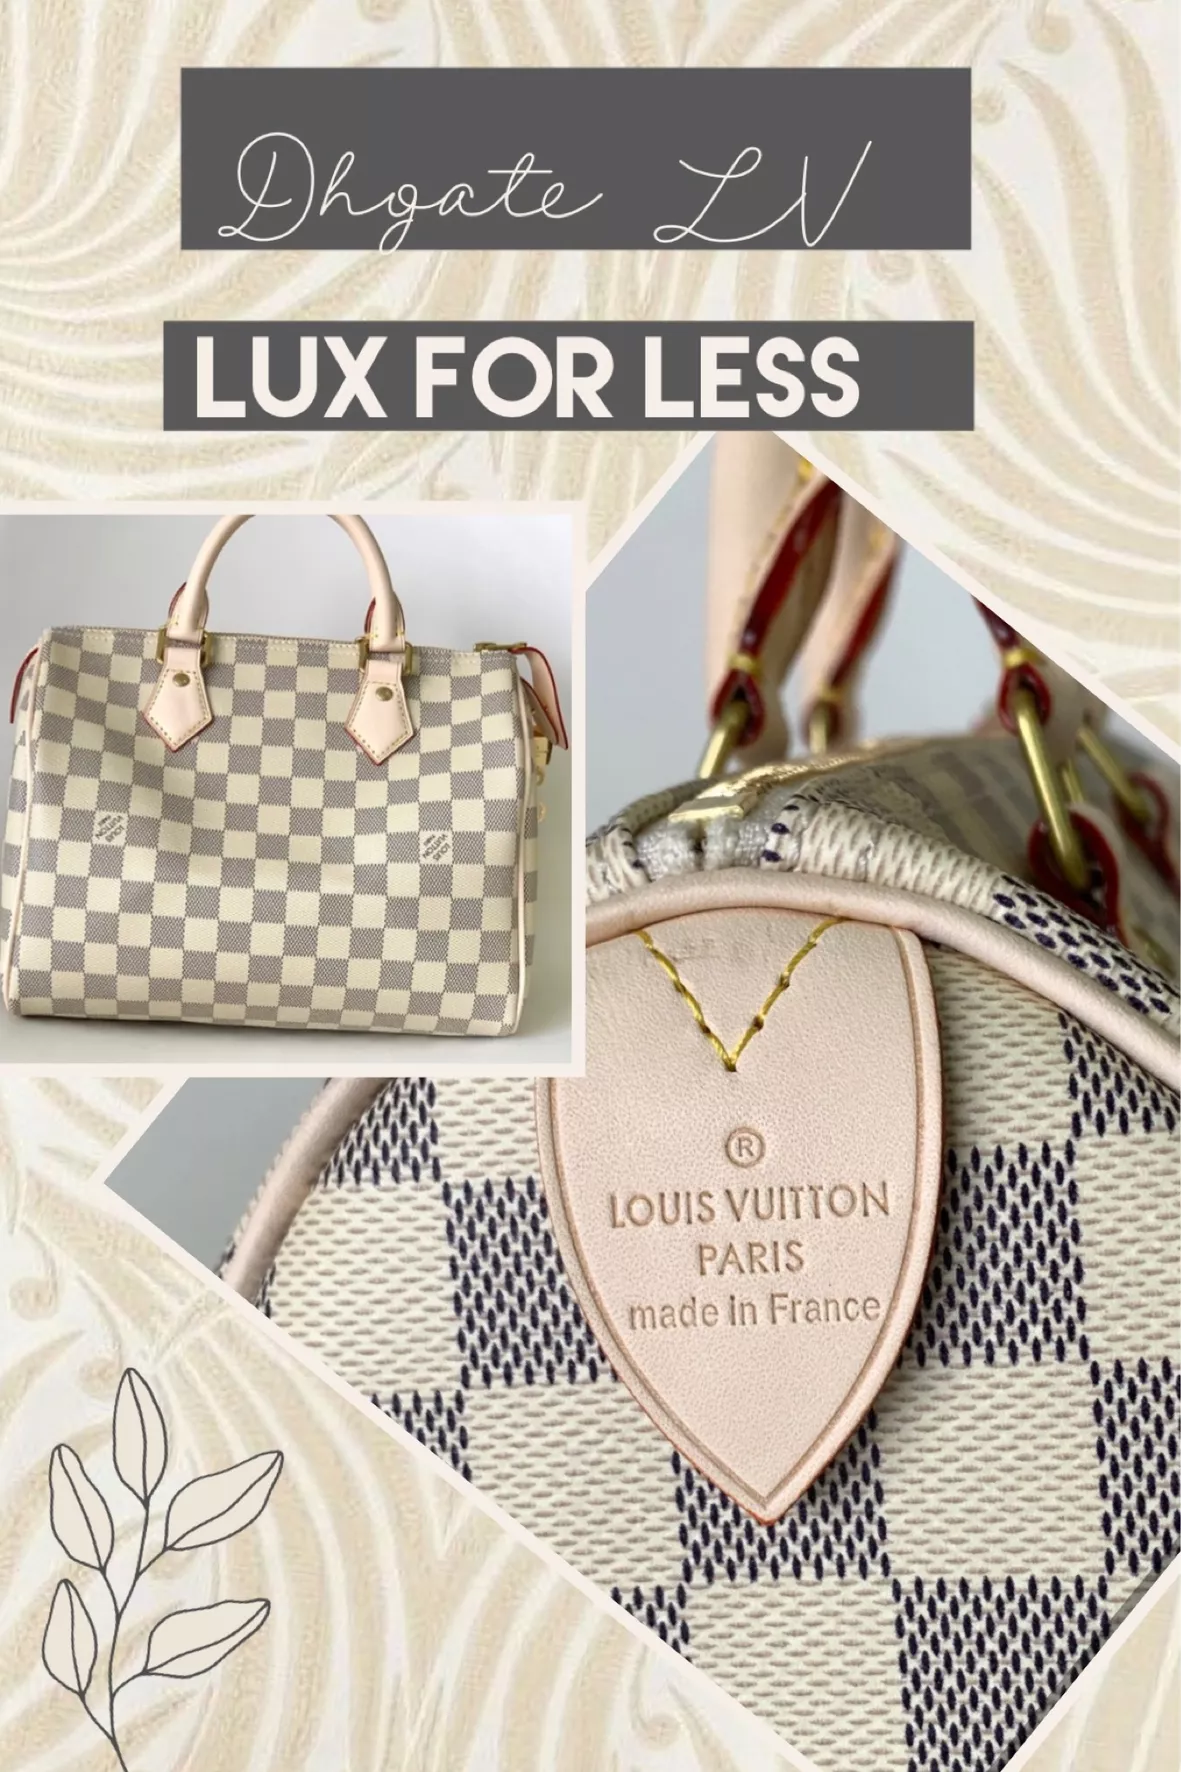 Any good sellers for the LV Coussin PM bag? : r/DHgate